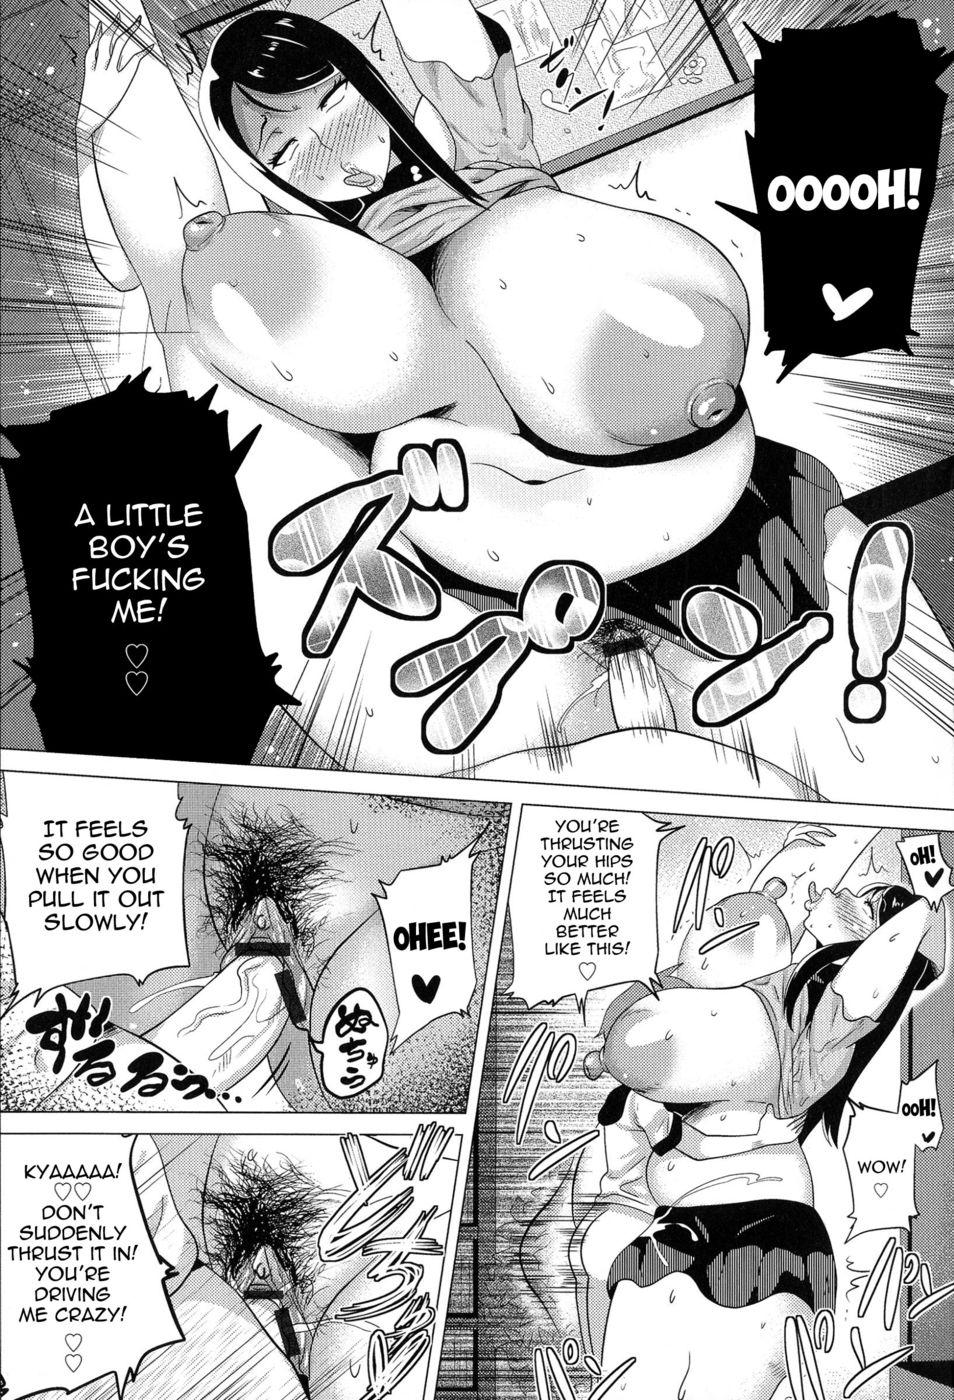 Chacal My Honey is PERVERTED-ONEECHAN HD - Page 11